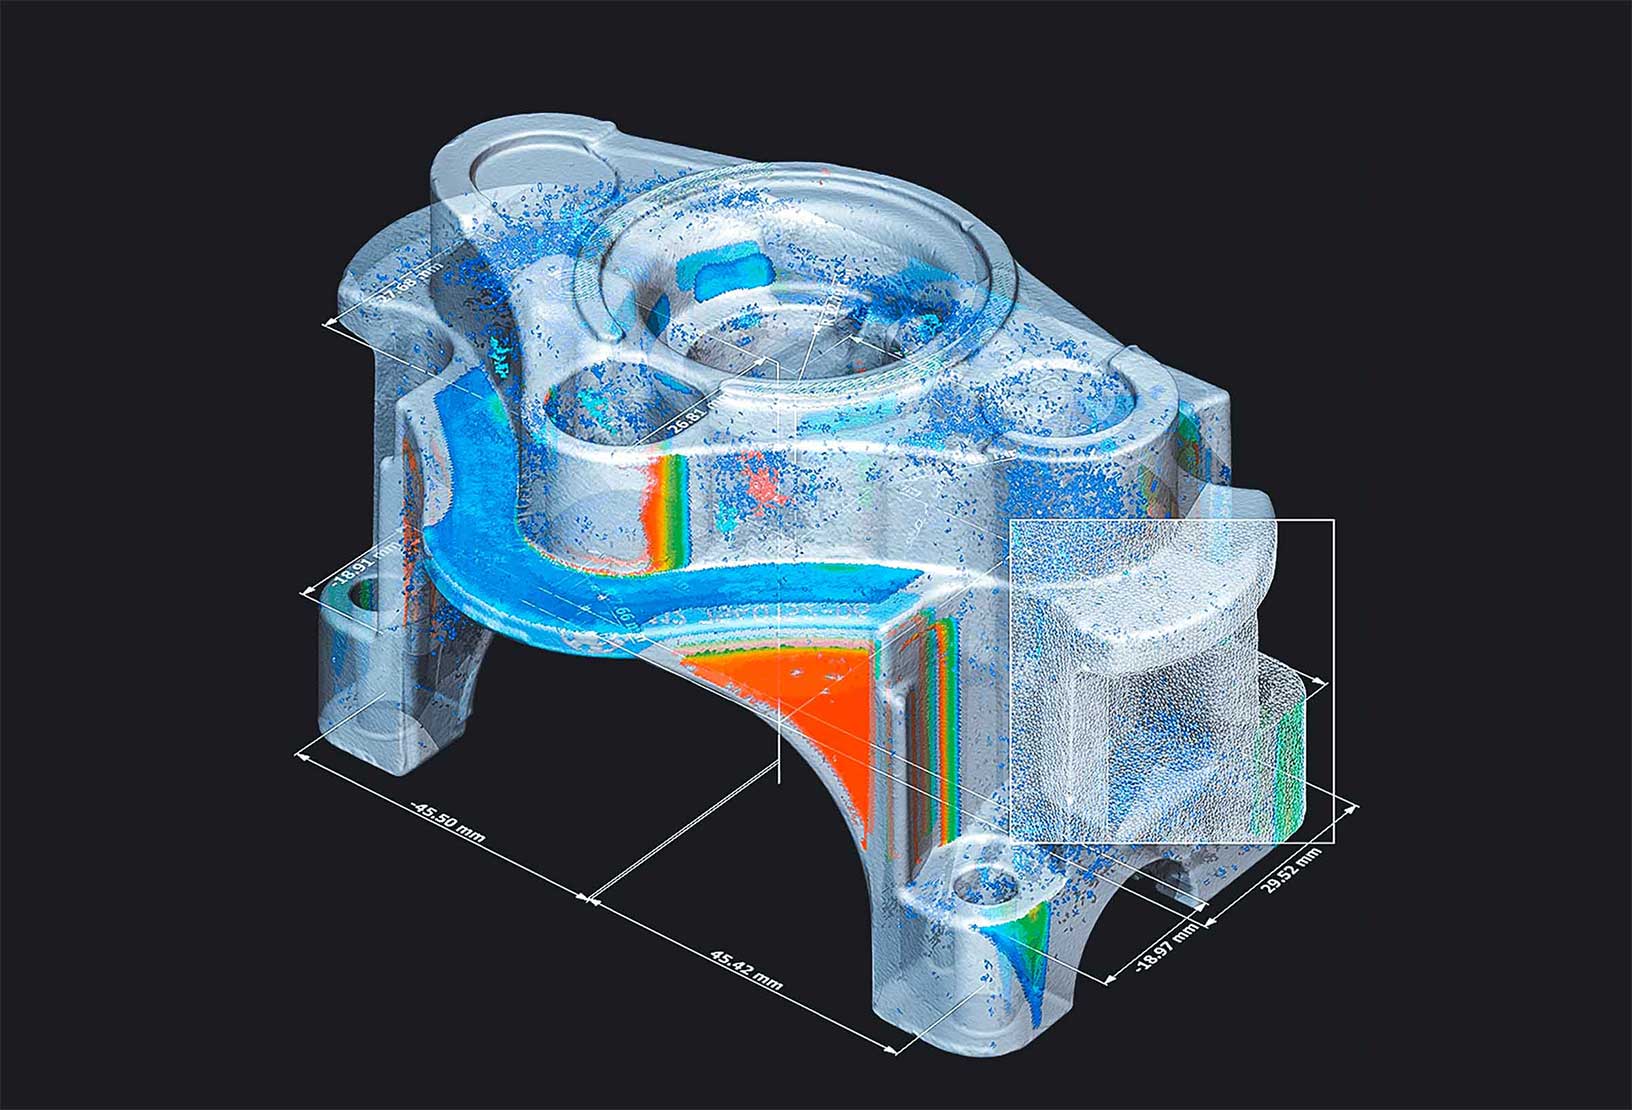 Hexagon’s CT analysis solutions enable manufacturers to conduct geometry and material analyses on the same part.